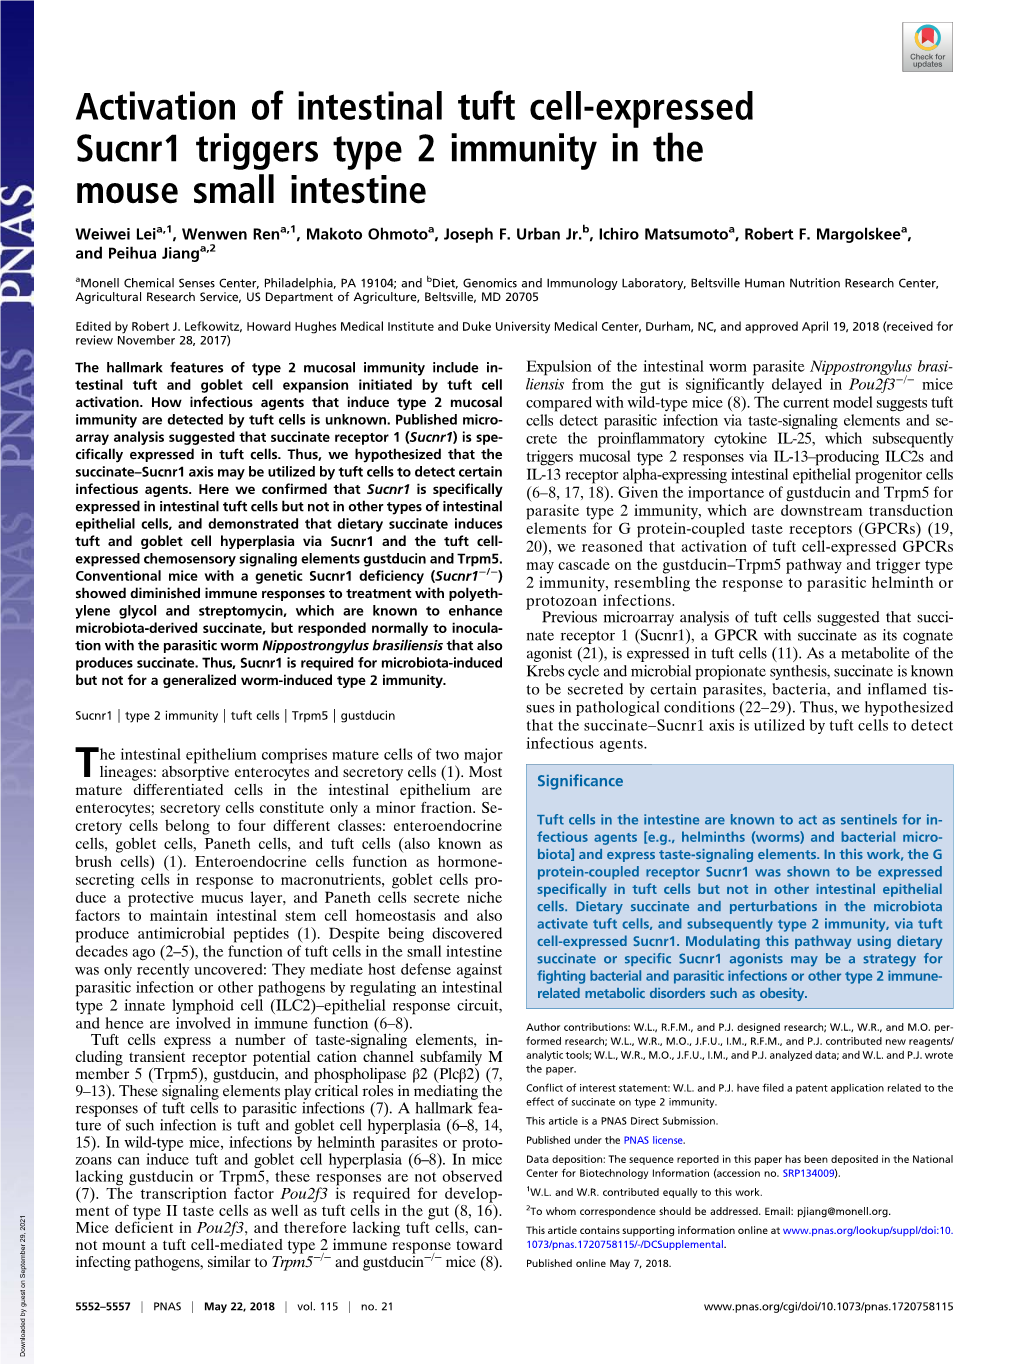 Activation of Intestinal Tuft Cell-Expressed Sucnr1 Triggers Type 2 Immunity in the Mouse Small Intestine